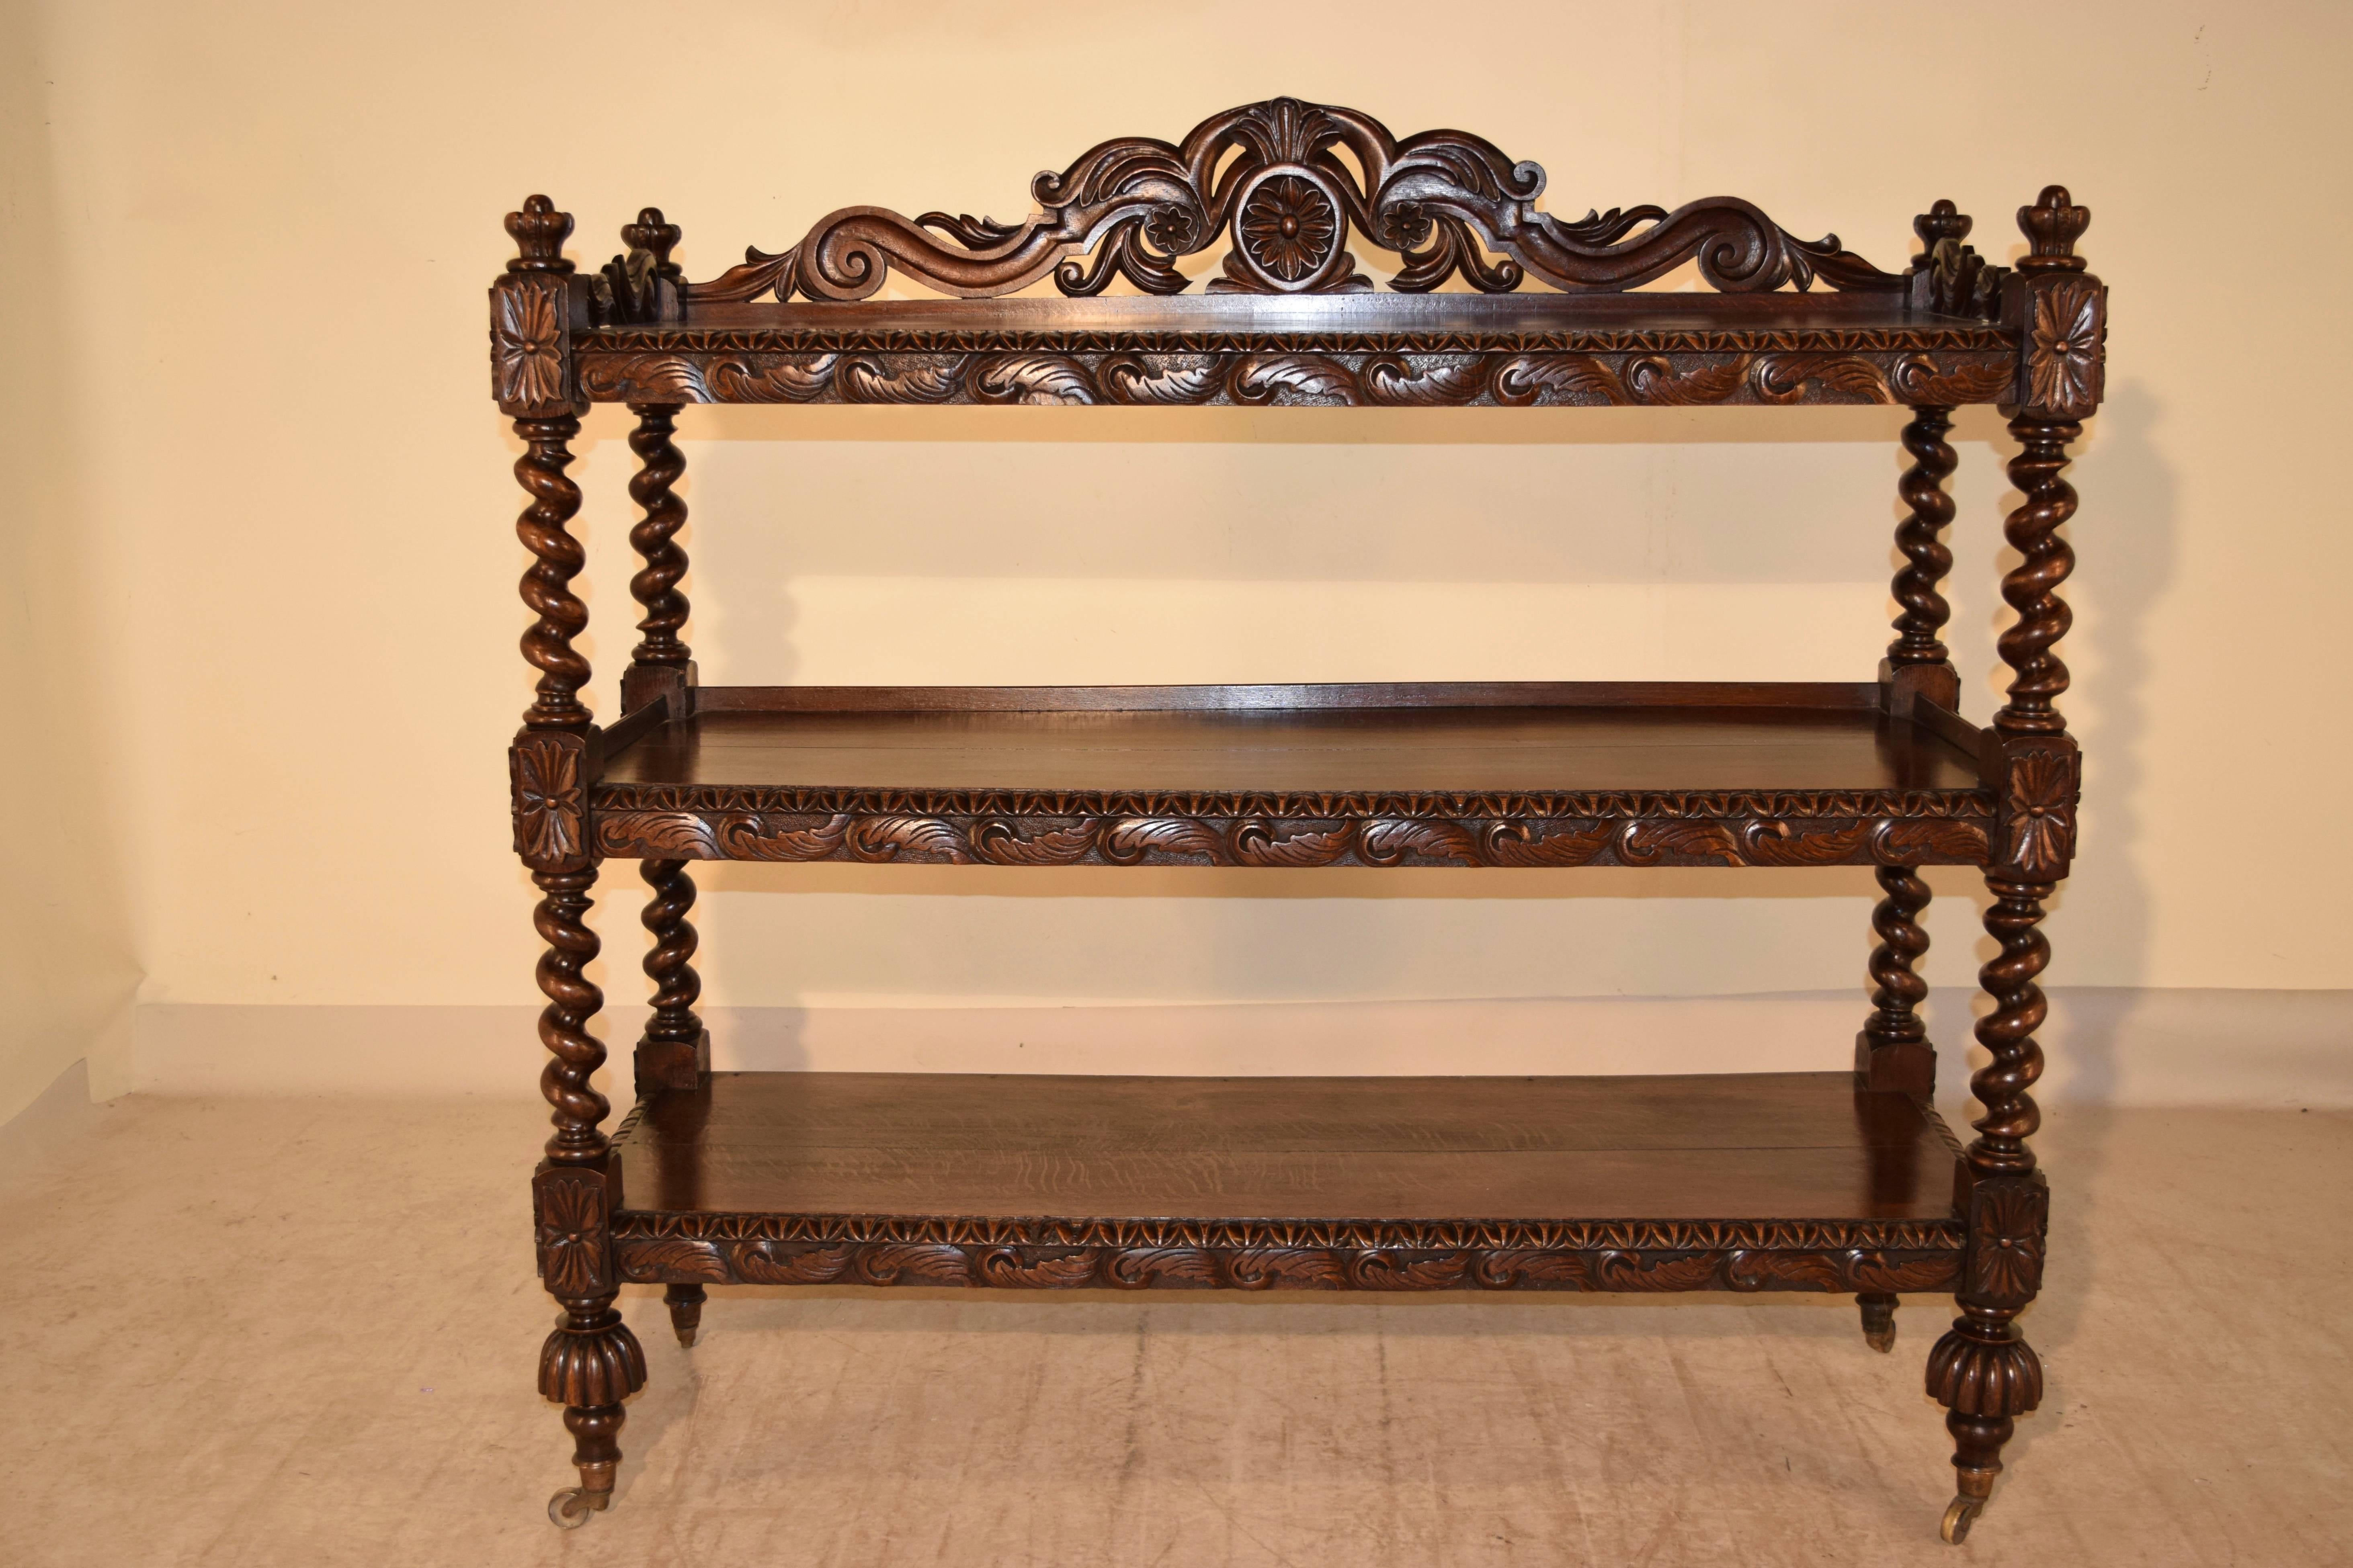 19th century large carved shelf from France which is fantastically carved throughout the piece. The back splash and top side rails are ornately carved with acanthus leaves and the top finials are hand-carved in the shapes of crowns. The shelves have